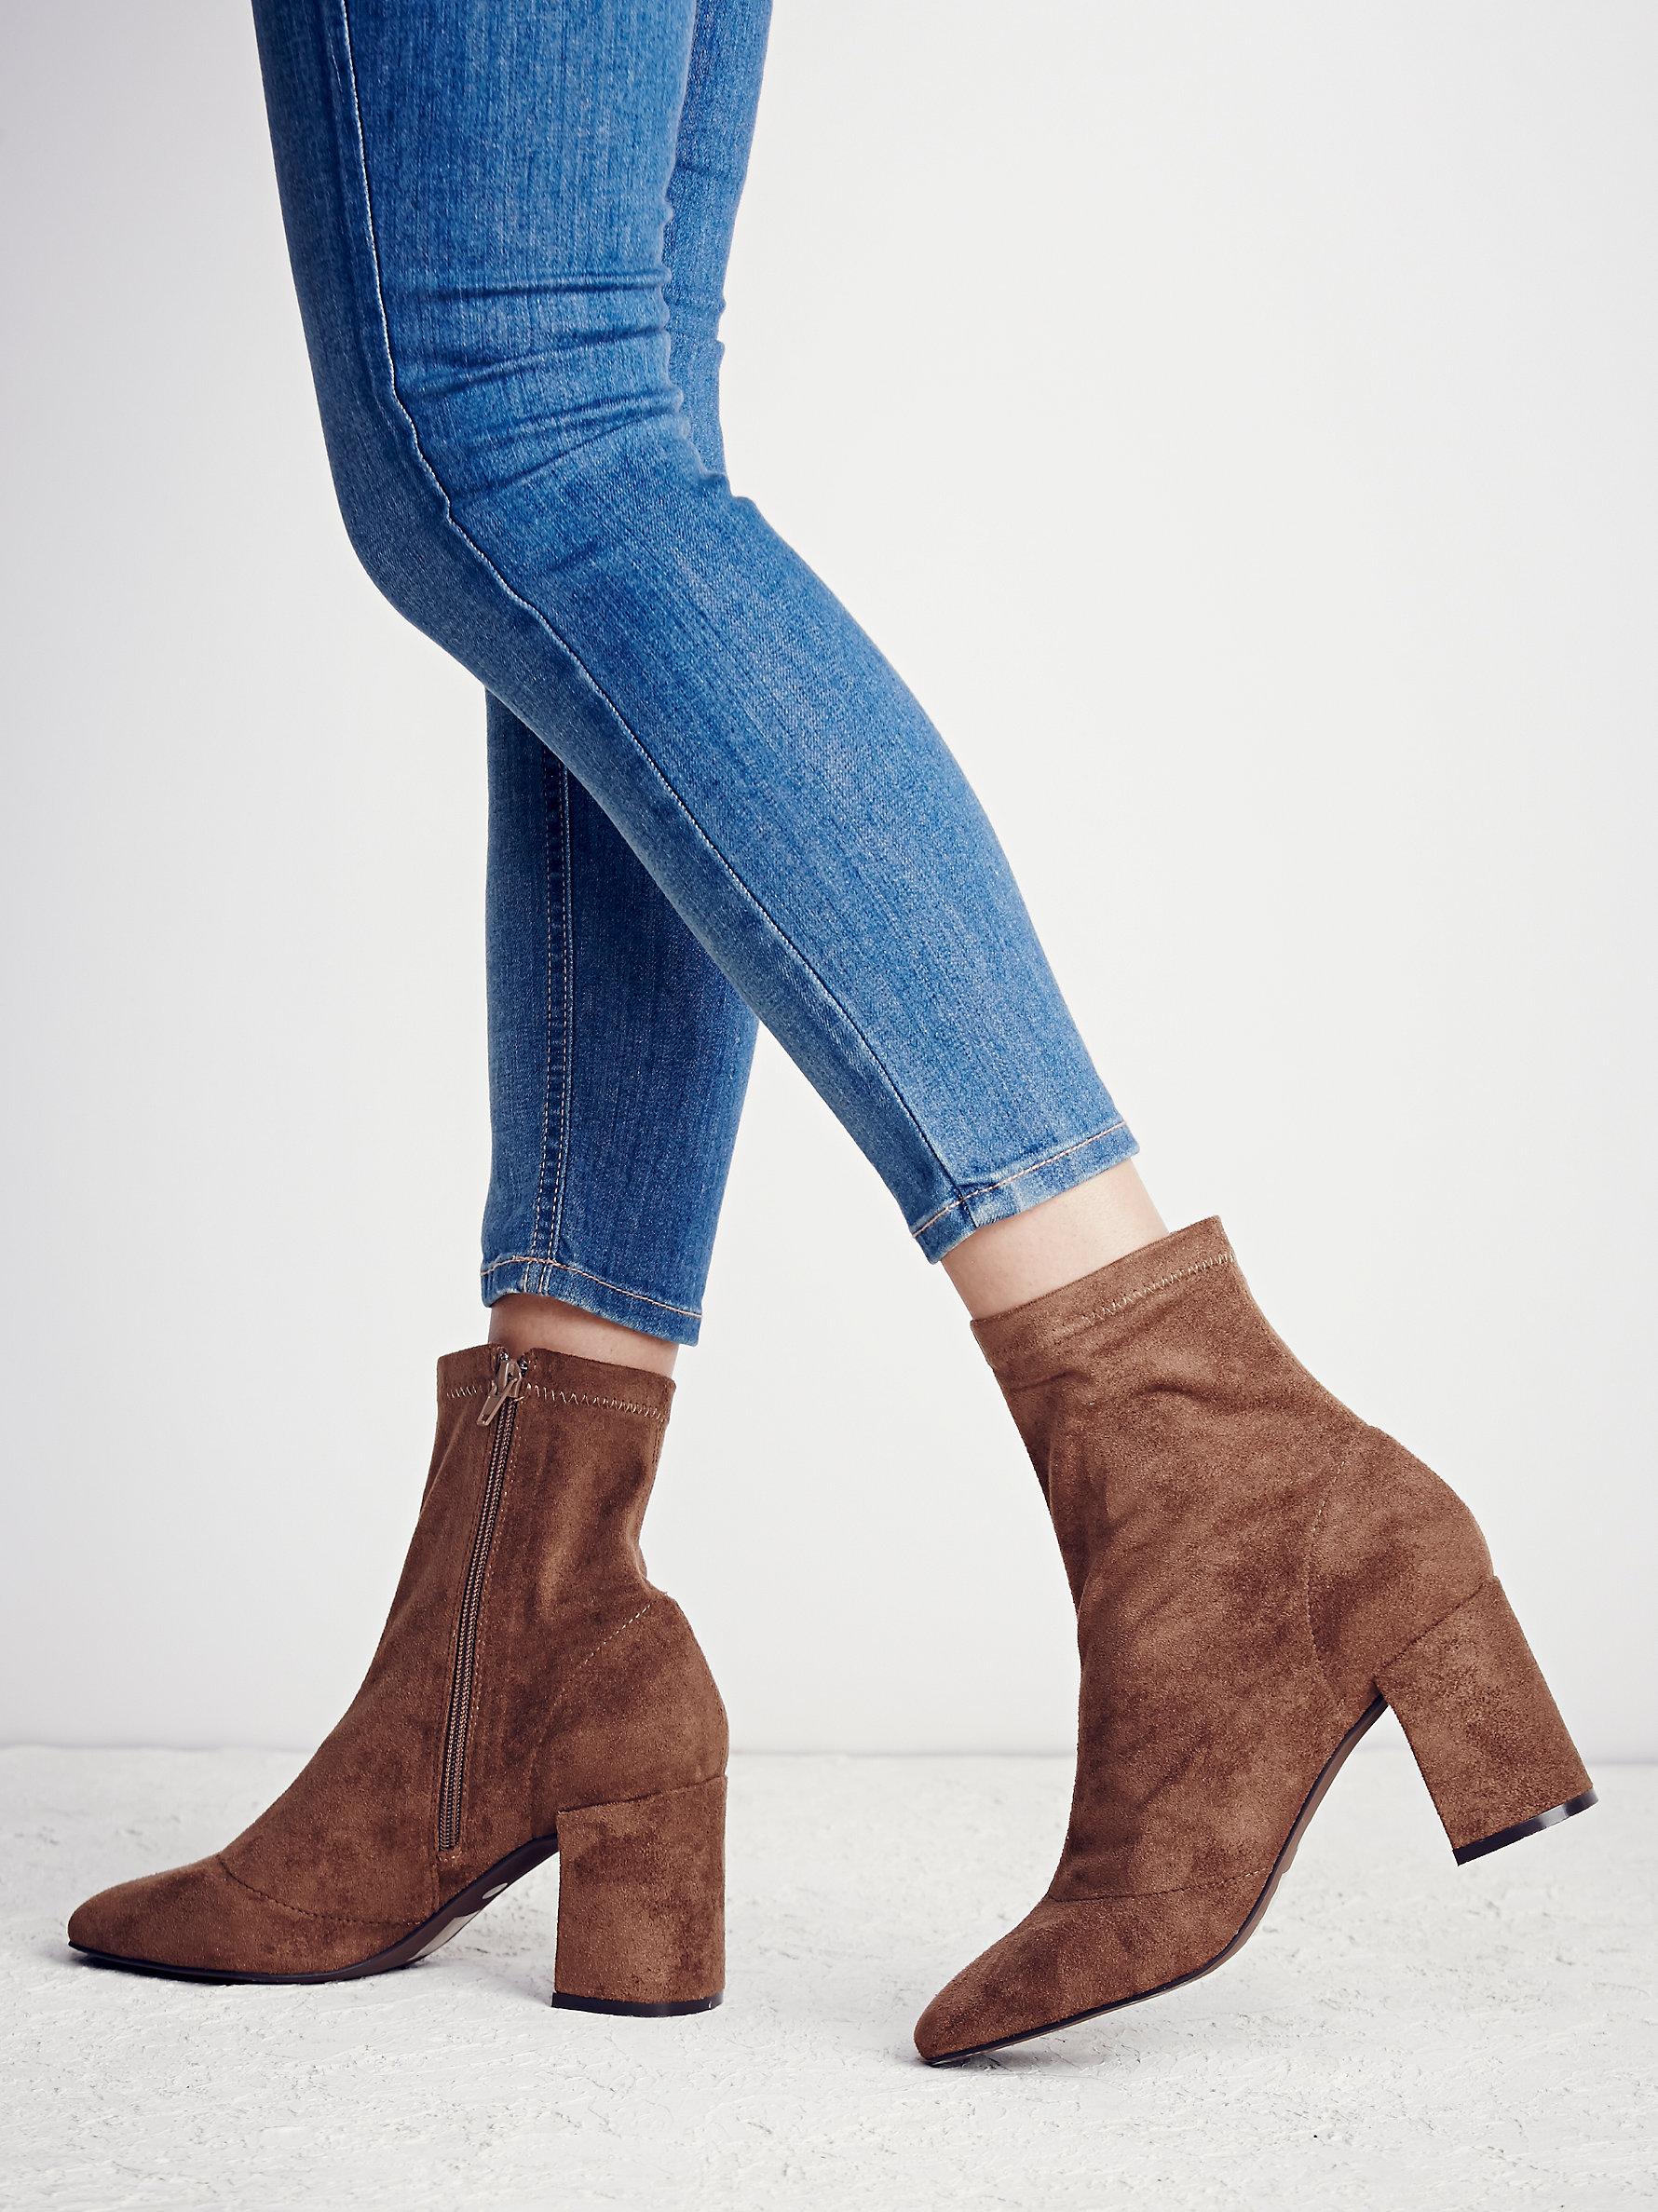 Free People Suede World Tour Ankle Boot in Taupe Suede (Brown) - Lyst